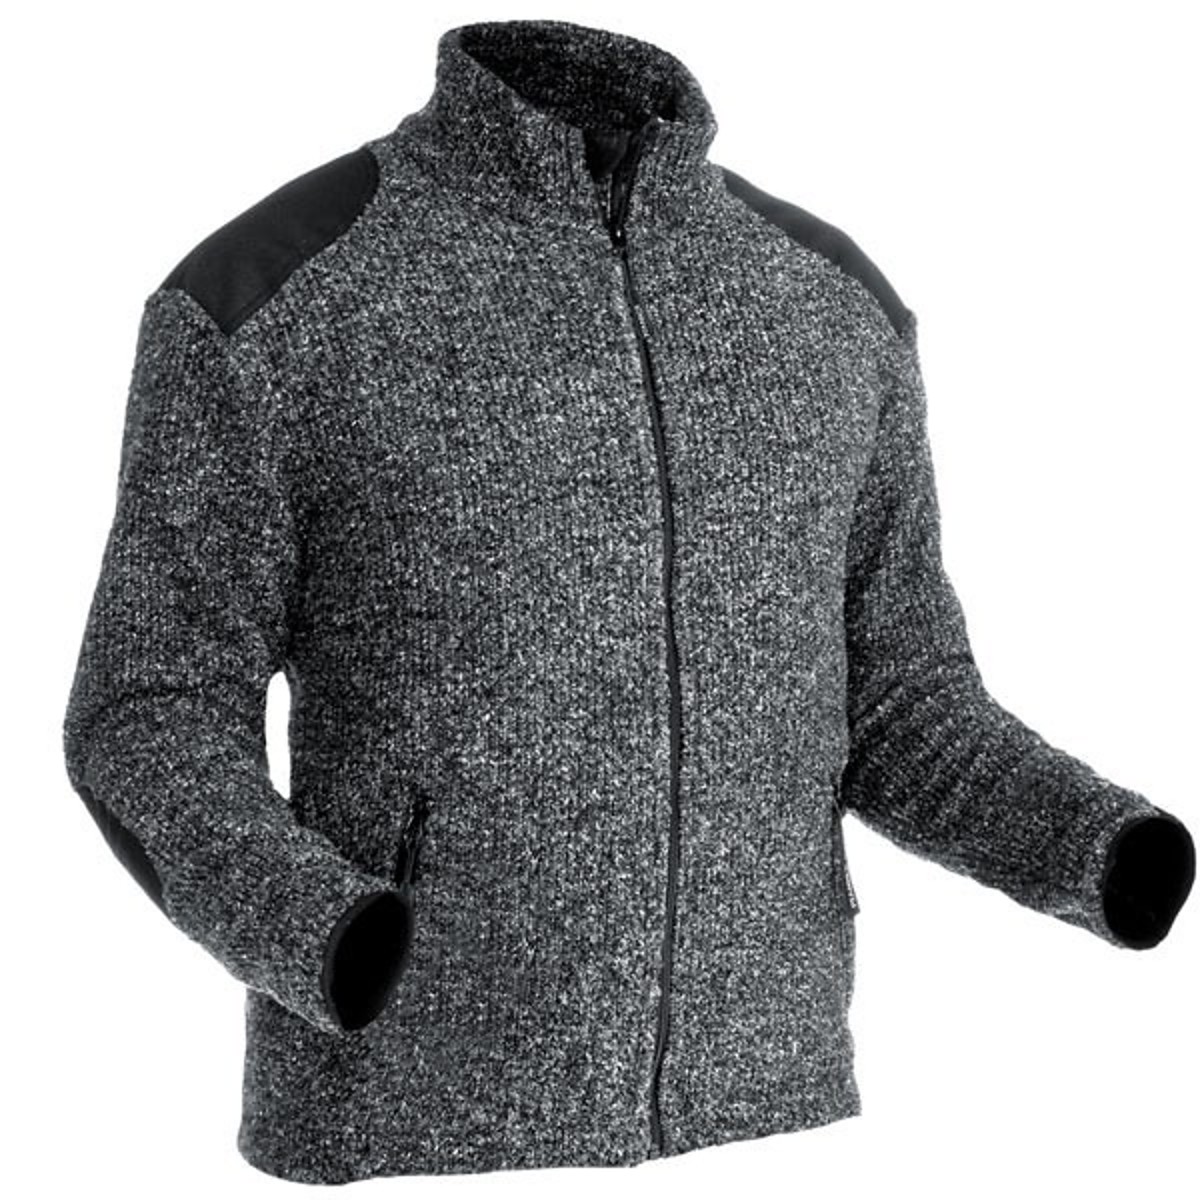 Pfanner Grizzly Jacke - 1